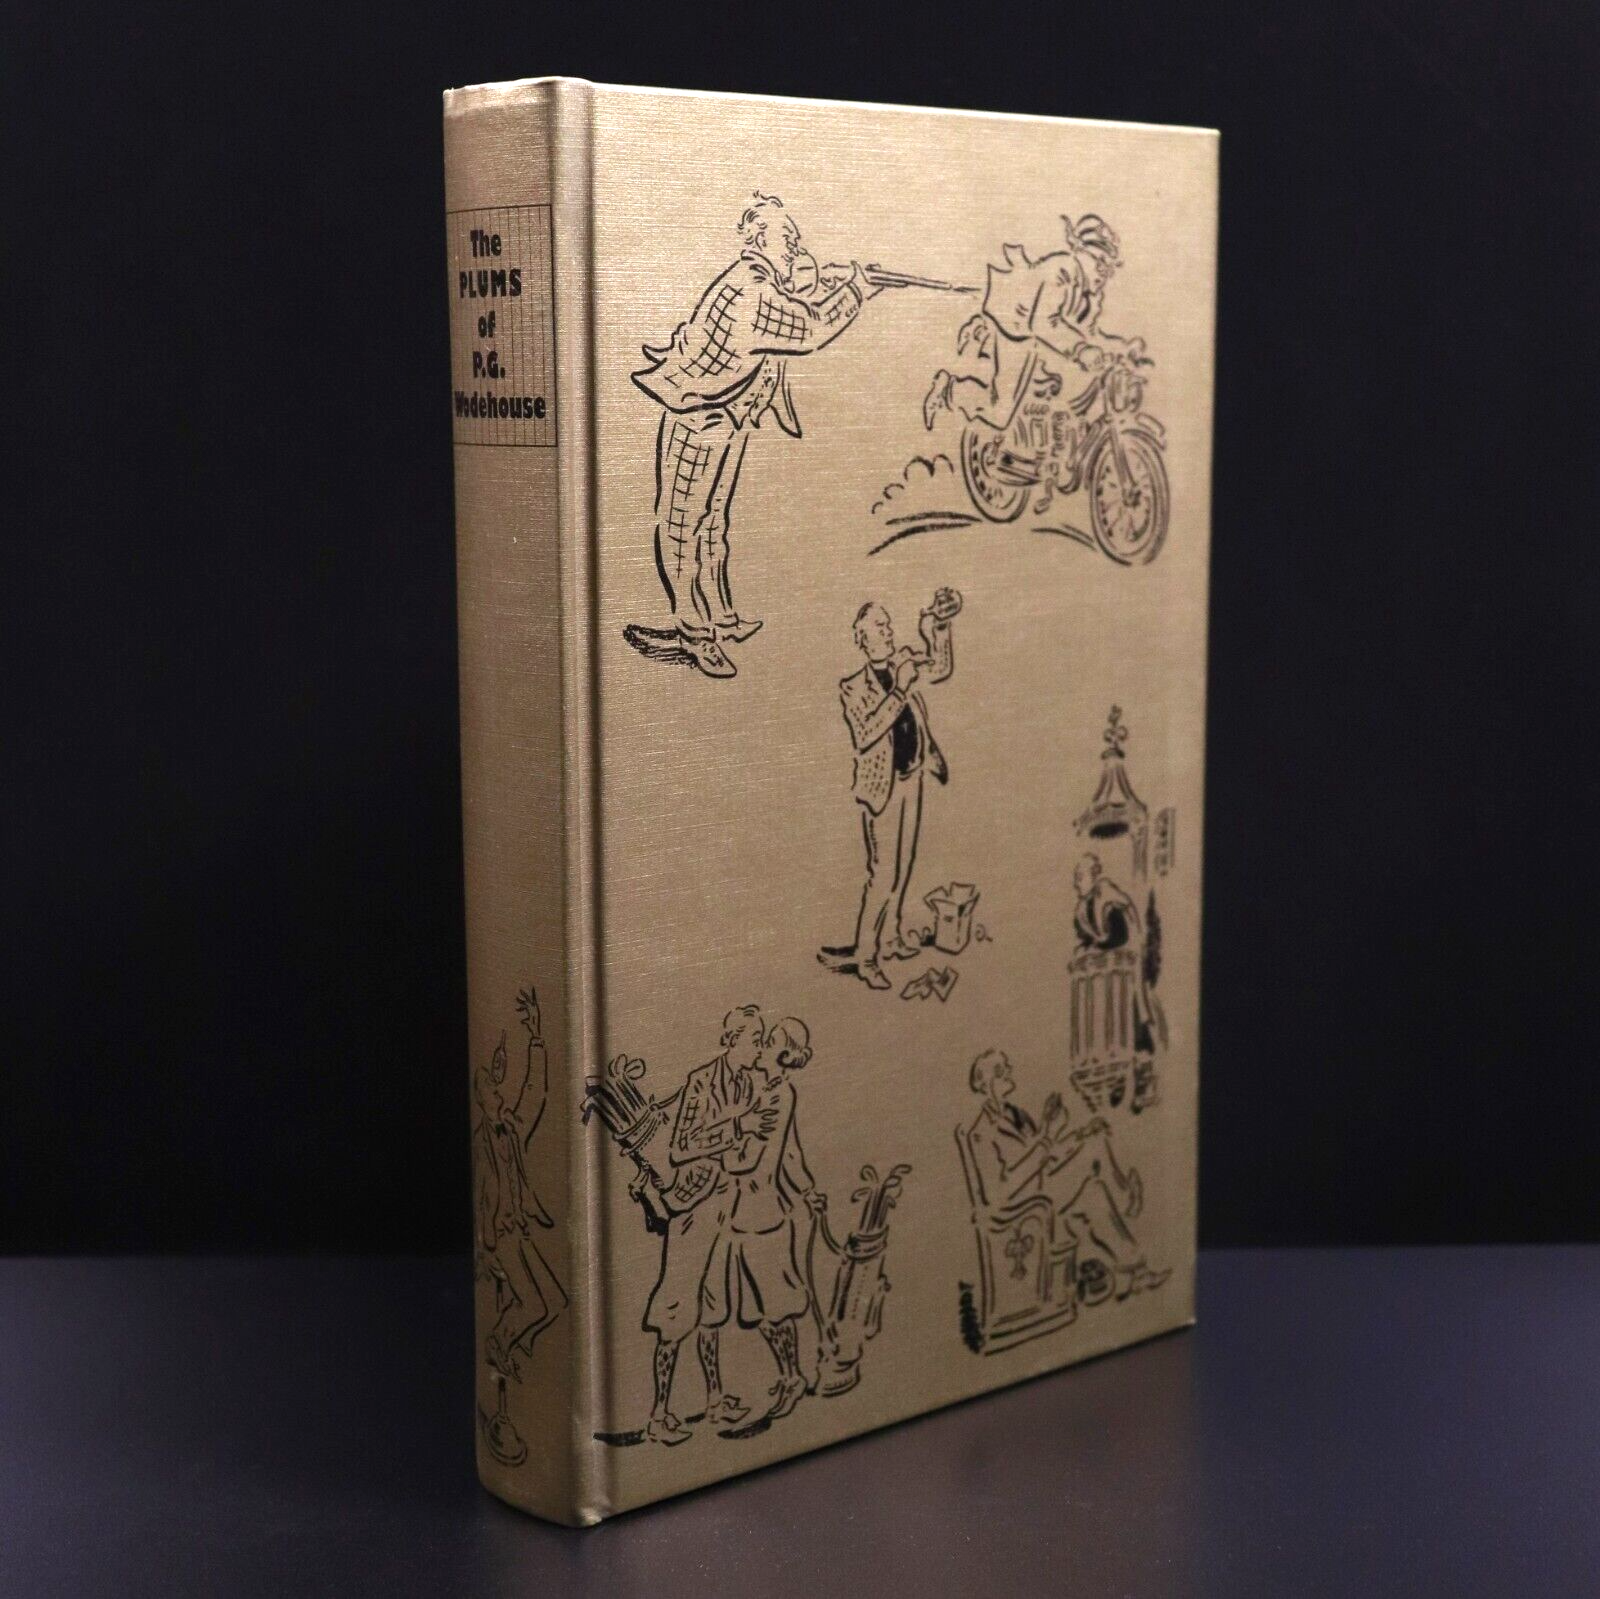 1997 The Plums Of P.G. Wodehouse Folio Society Book